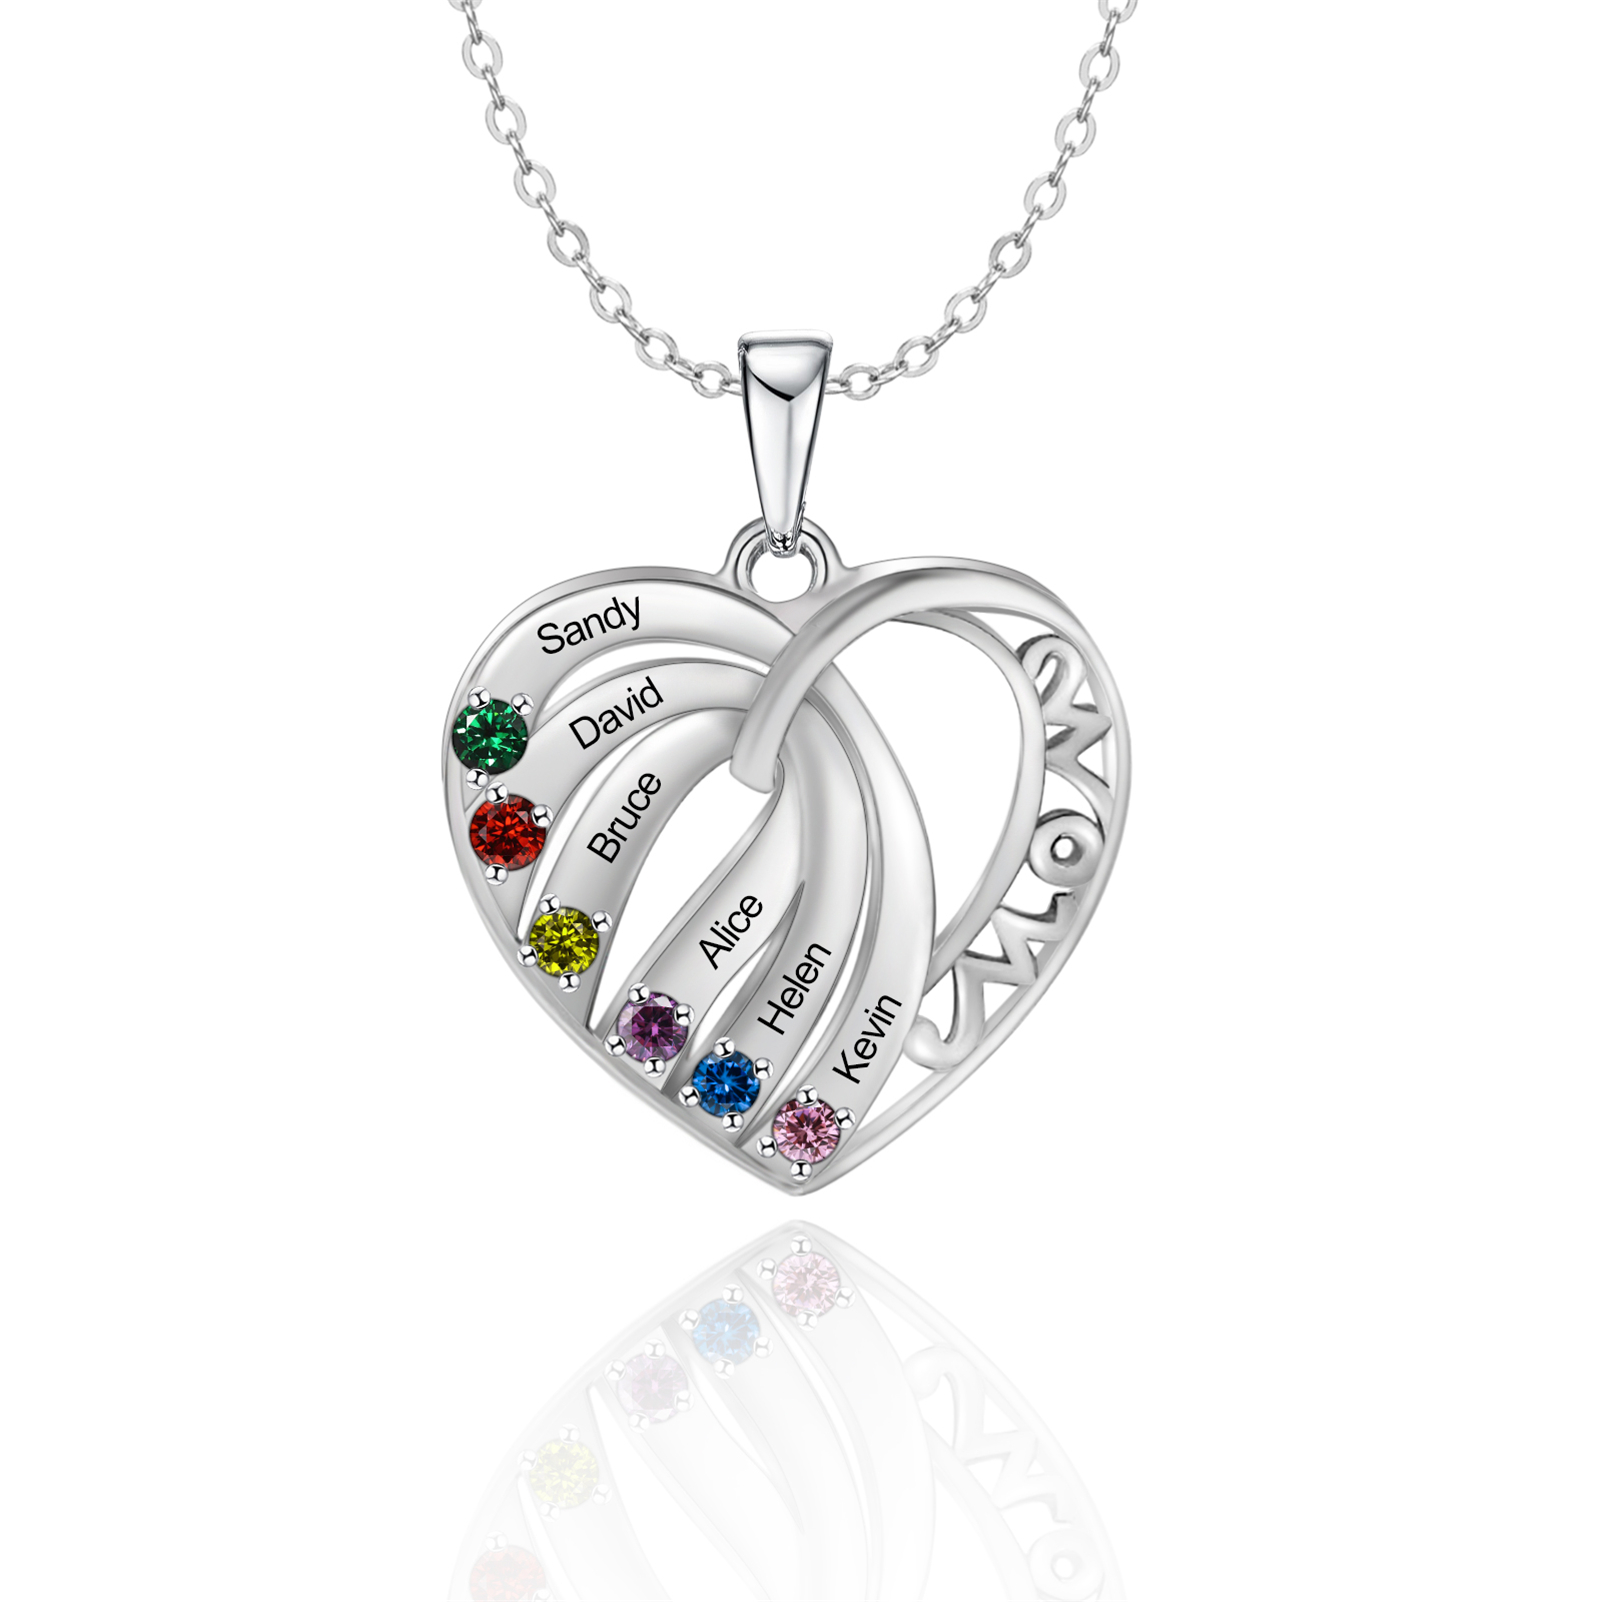 6-6-1 Love Heart Pendant Necklace Name Necklace with Engraving